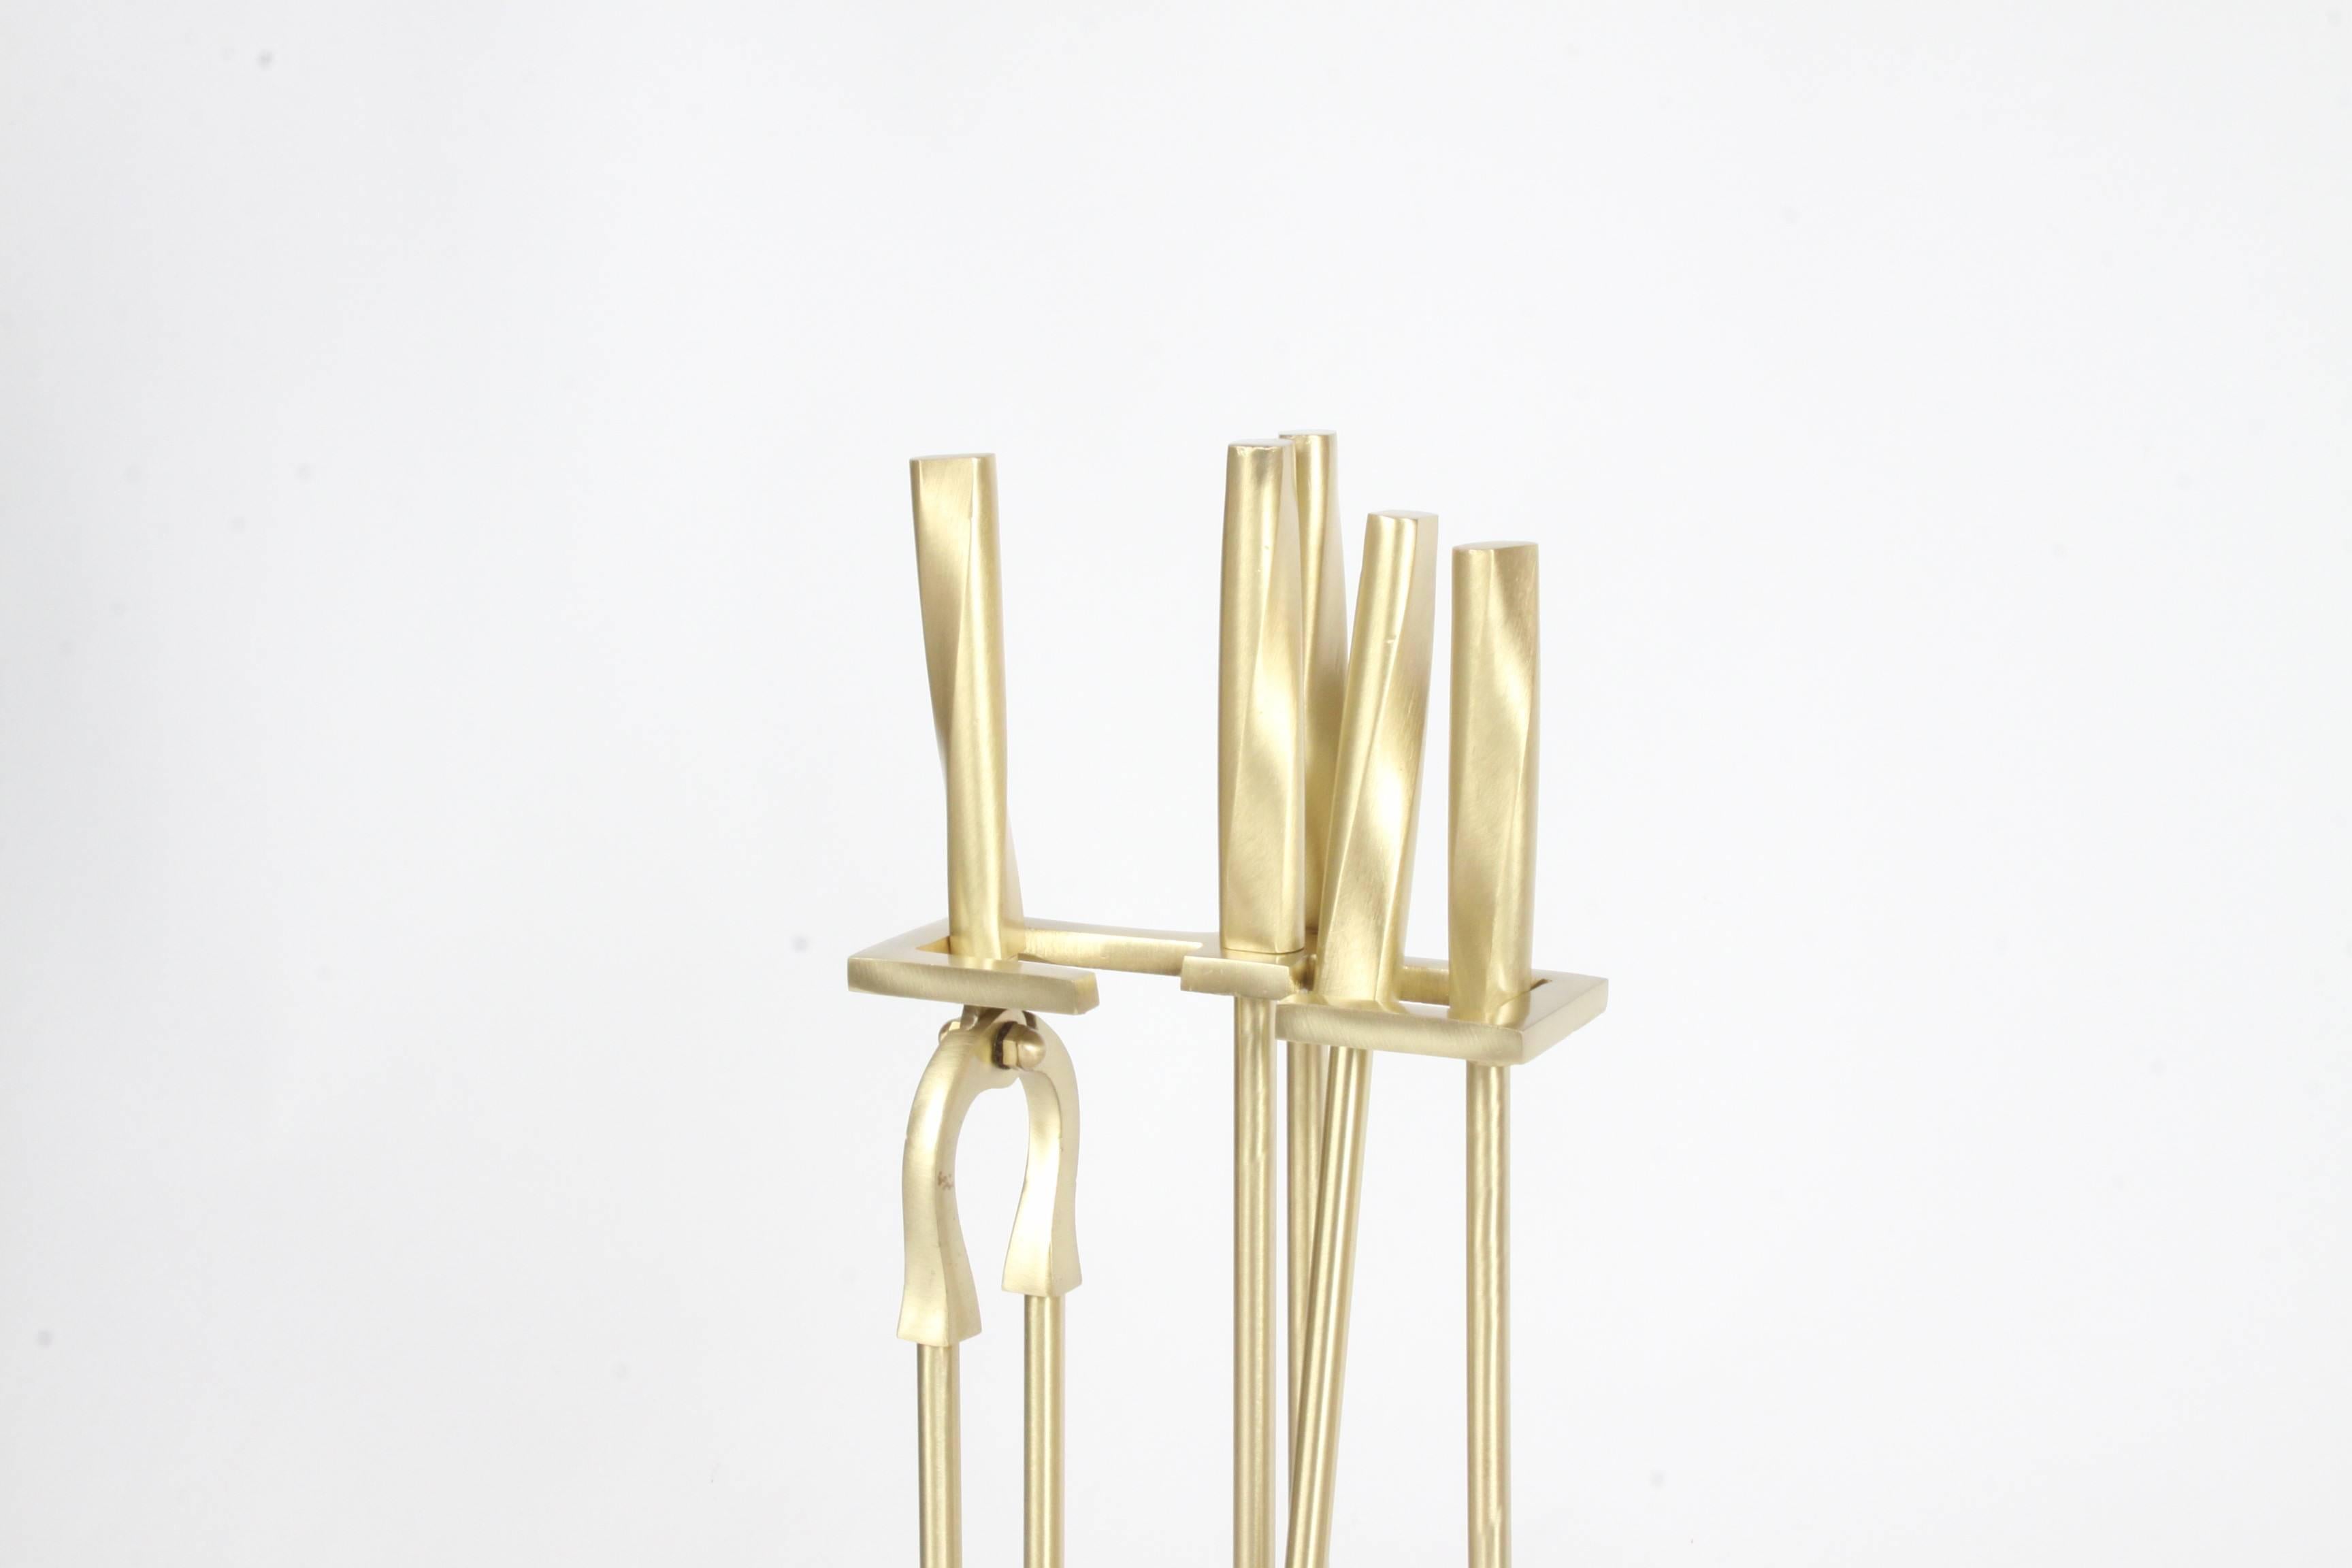 Mid-20th Century Brass Art Deco Modern torqued Andirons and Fire Tools Set, Deskey Style For Sale